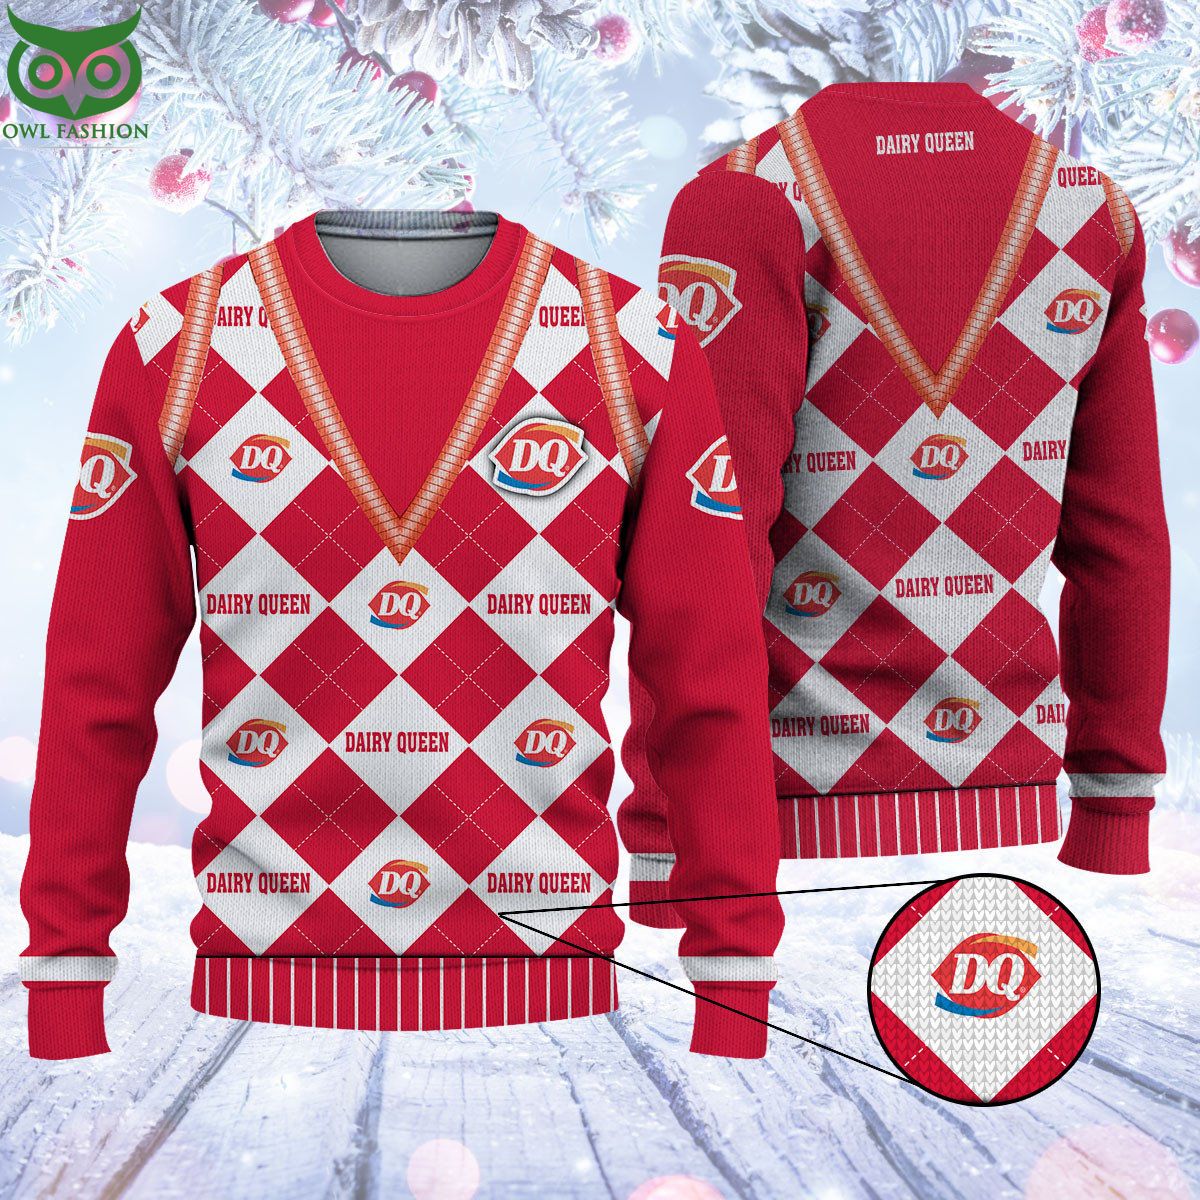 Dairy Queen Red Ugly Sweater This design is a work of art.